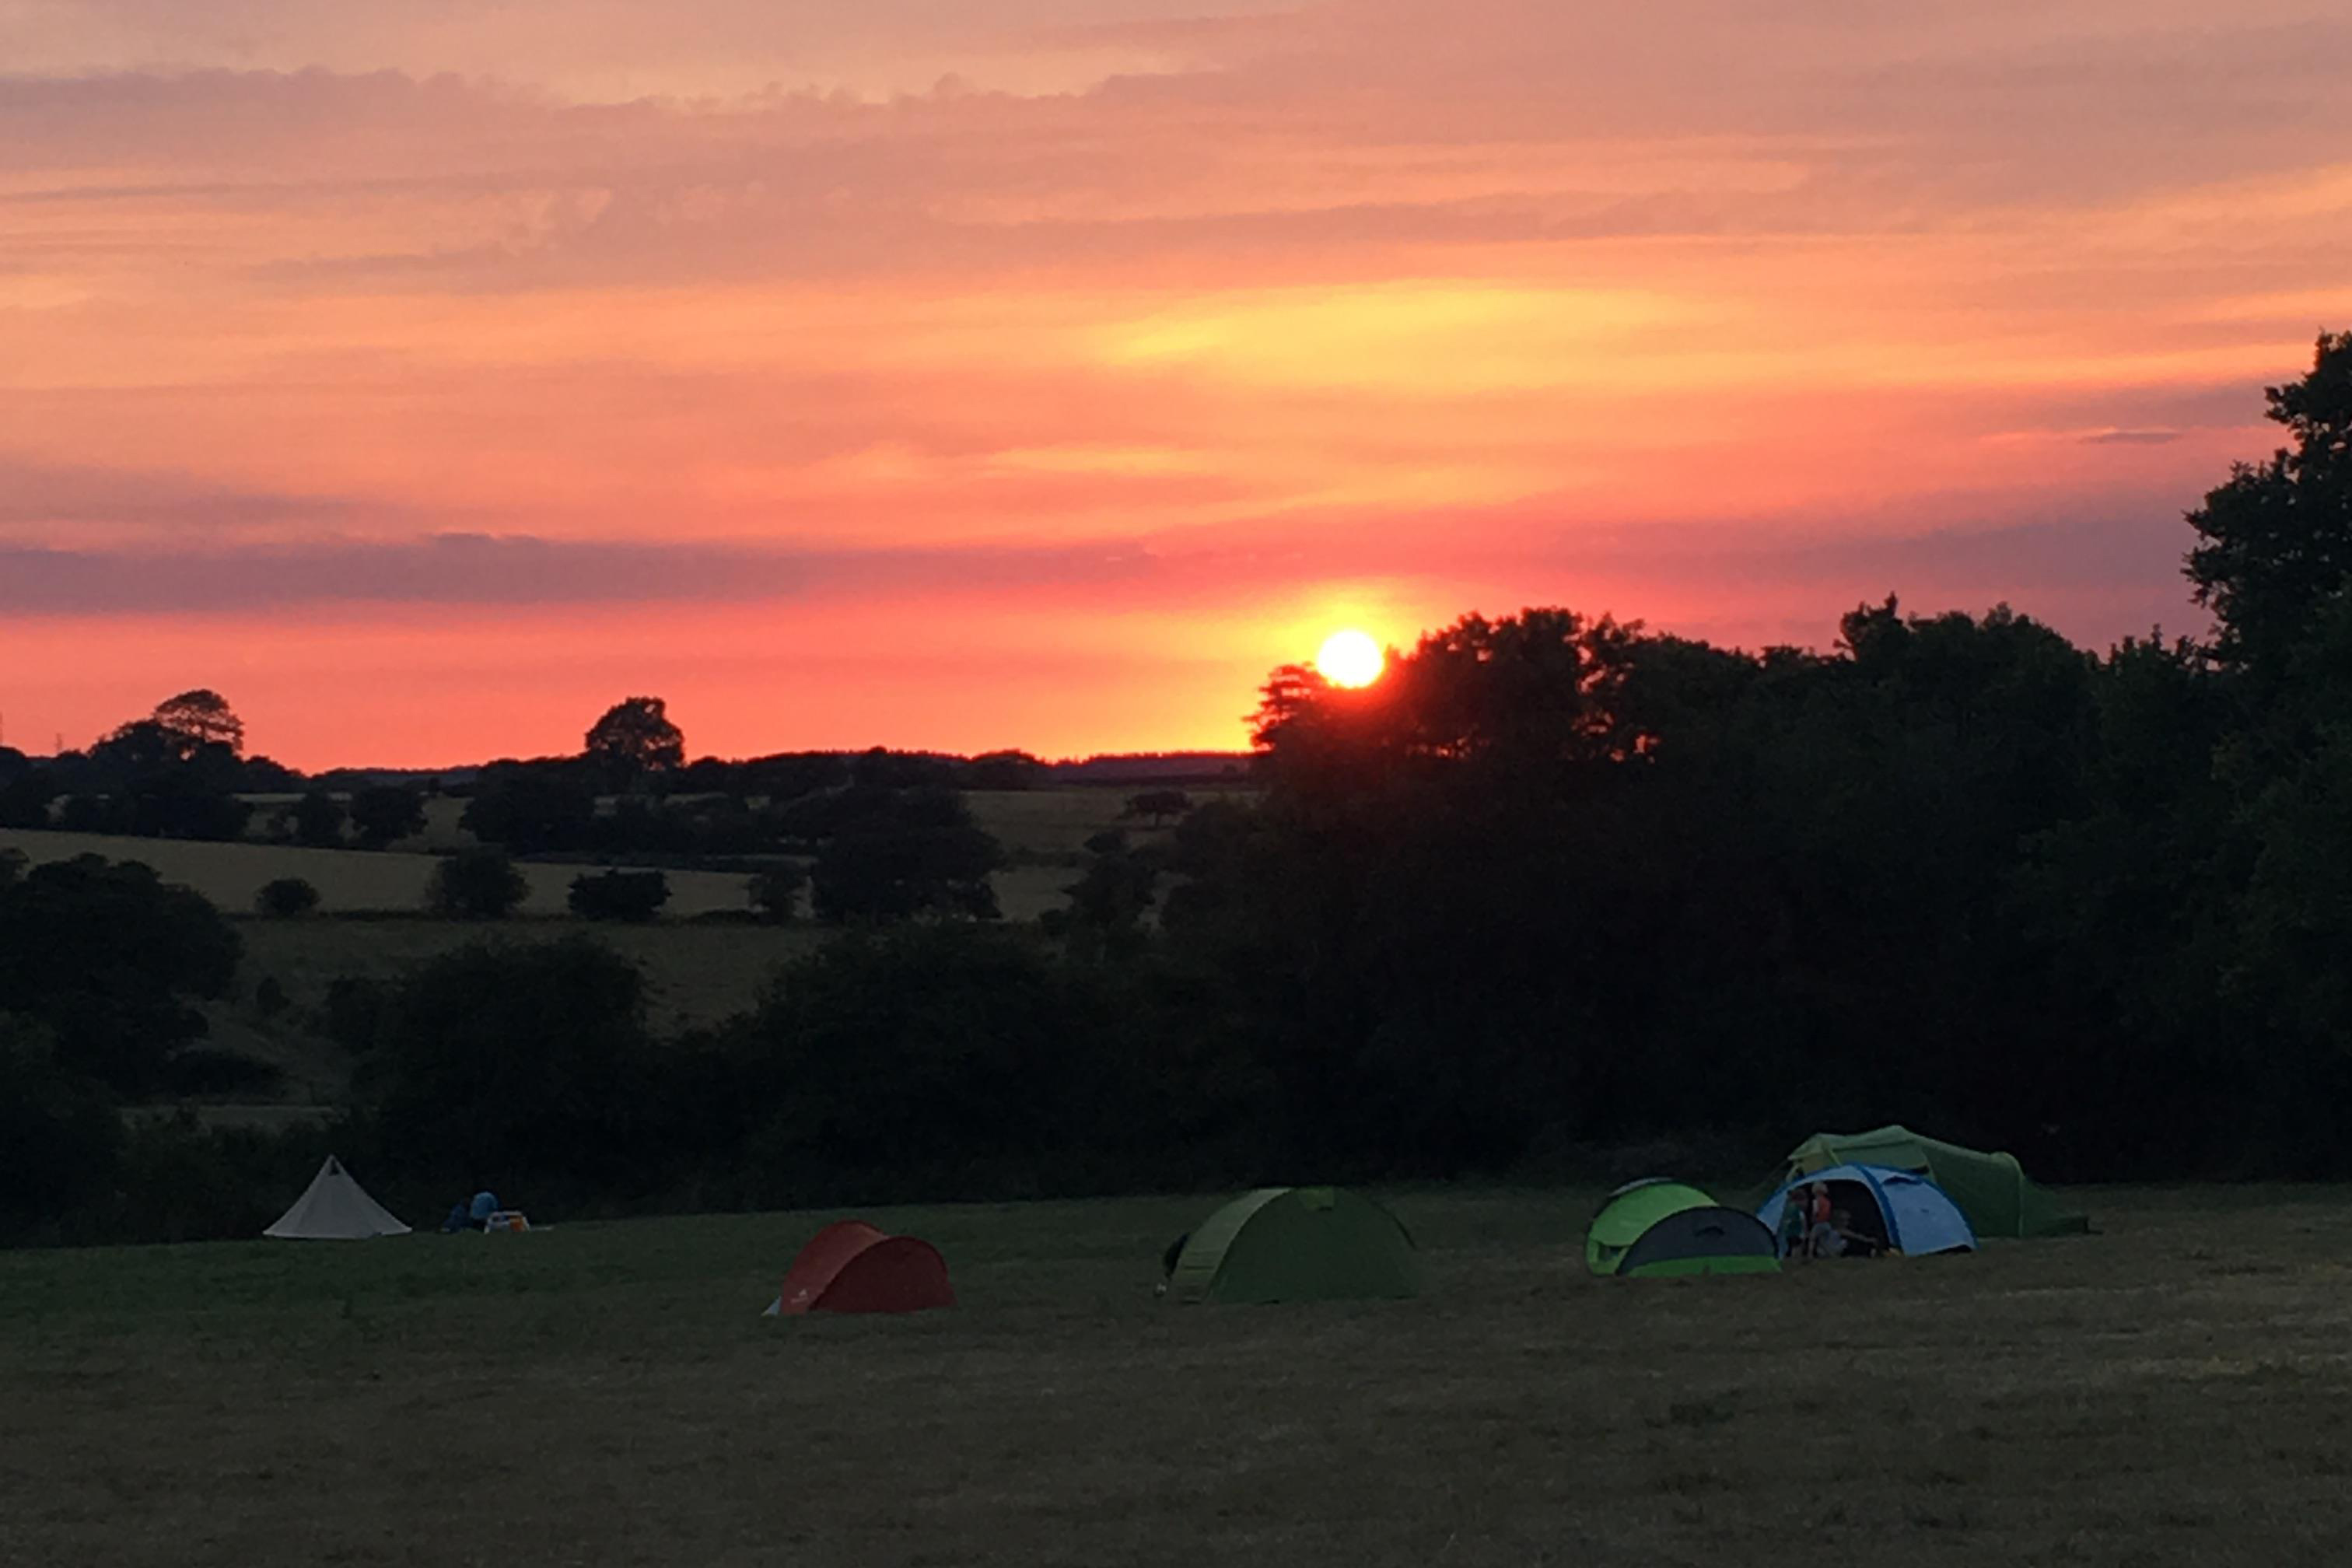 Sunset over Pete's Field campsite -aiming to be one of the best campsites in Kent